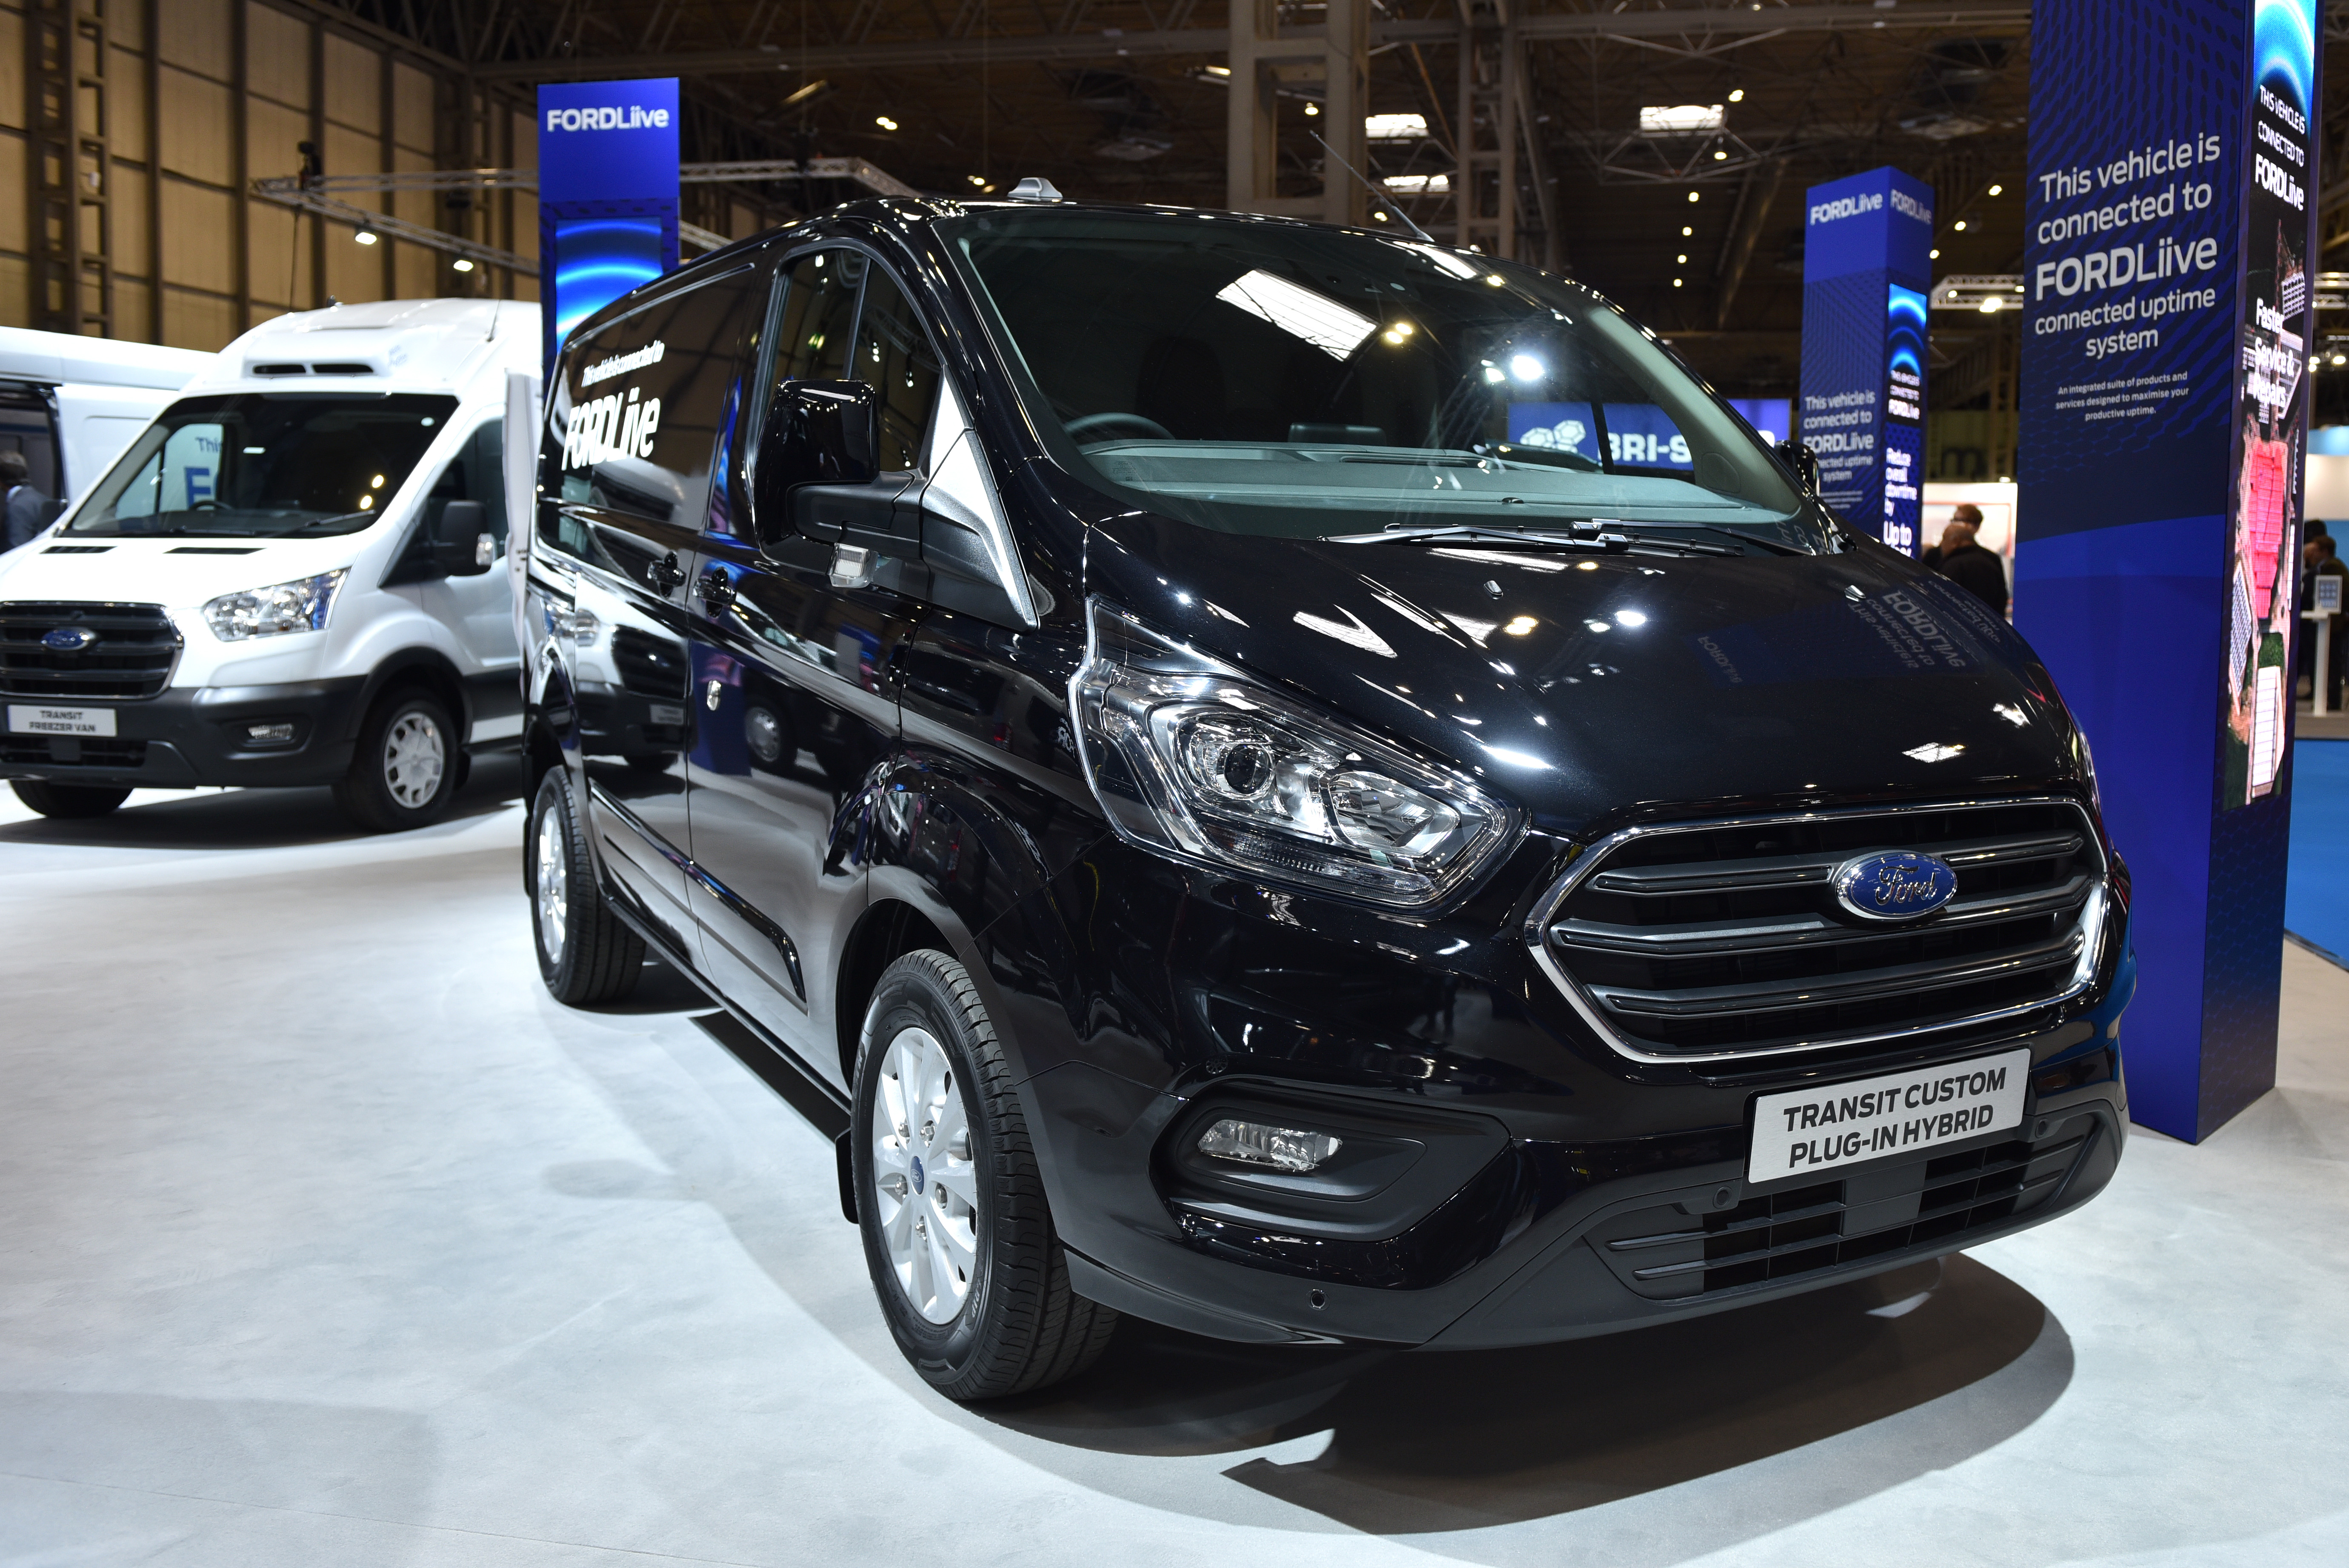 A new Ford Transit Custom Plug-in Hybrid van which is connected to FordLive is displayed during a vehicle show on September 2, 2021, in Birmingham, England.